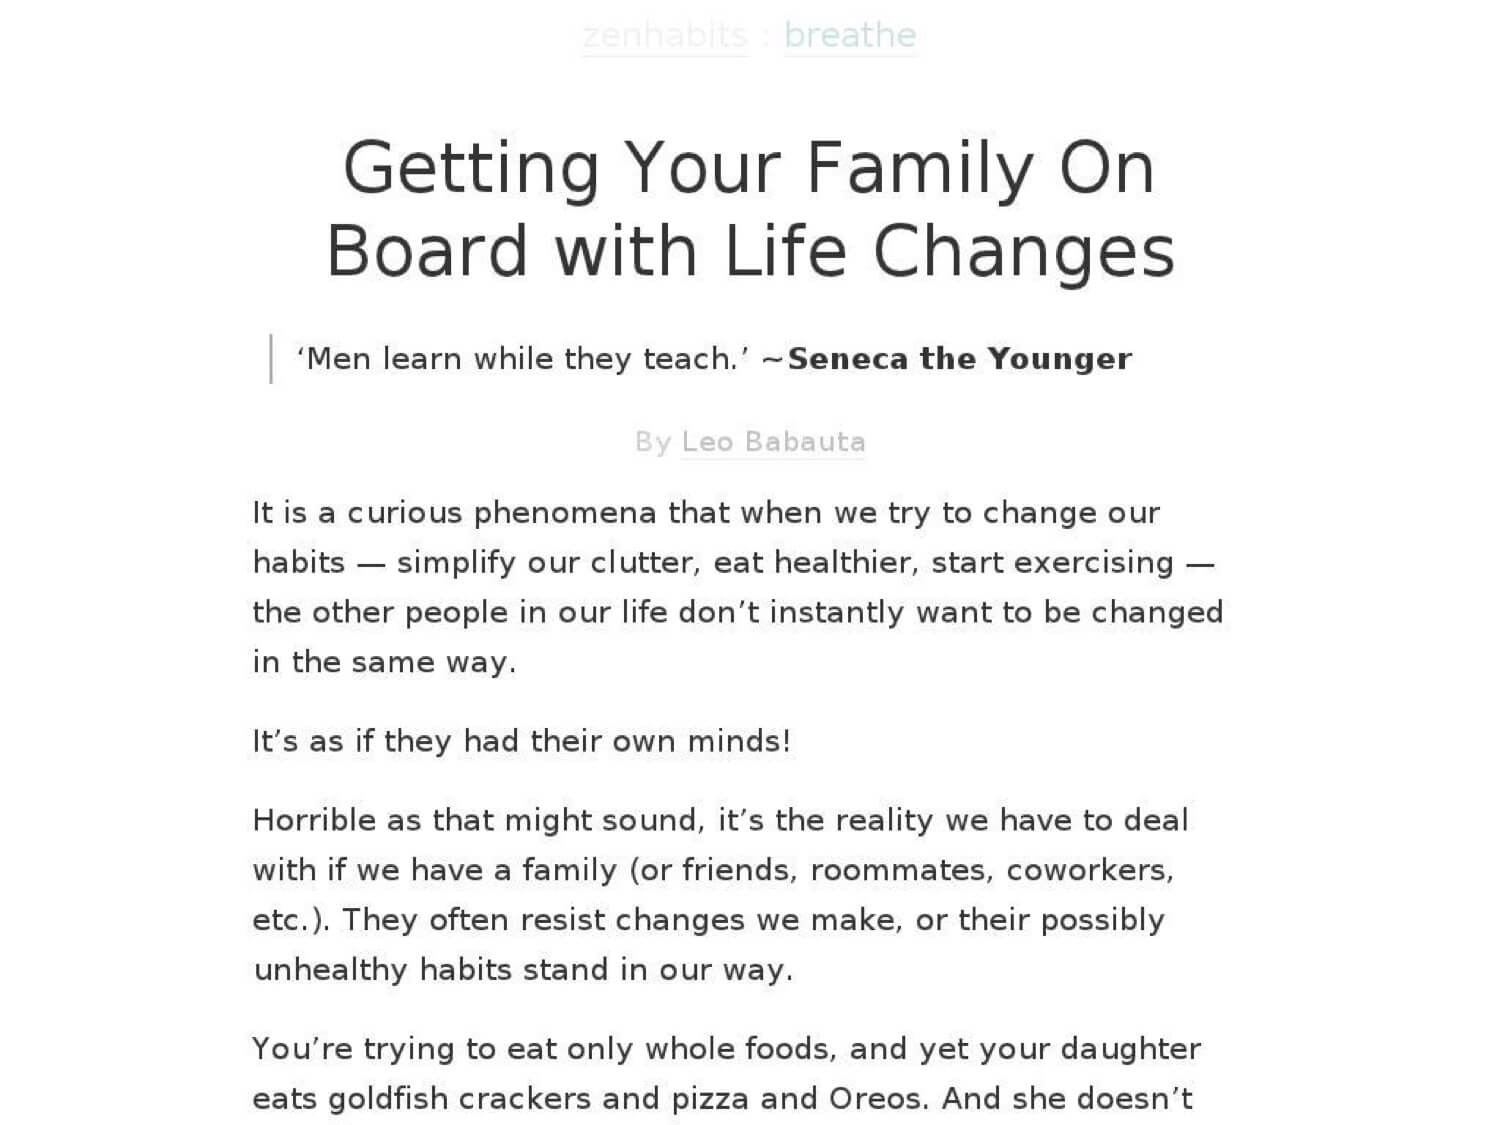 This is something I’ve been struggling with recently: Getting Your Family On Board with Life Changes